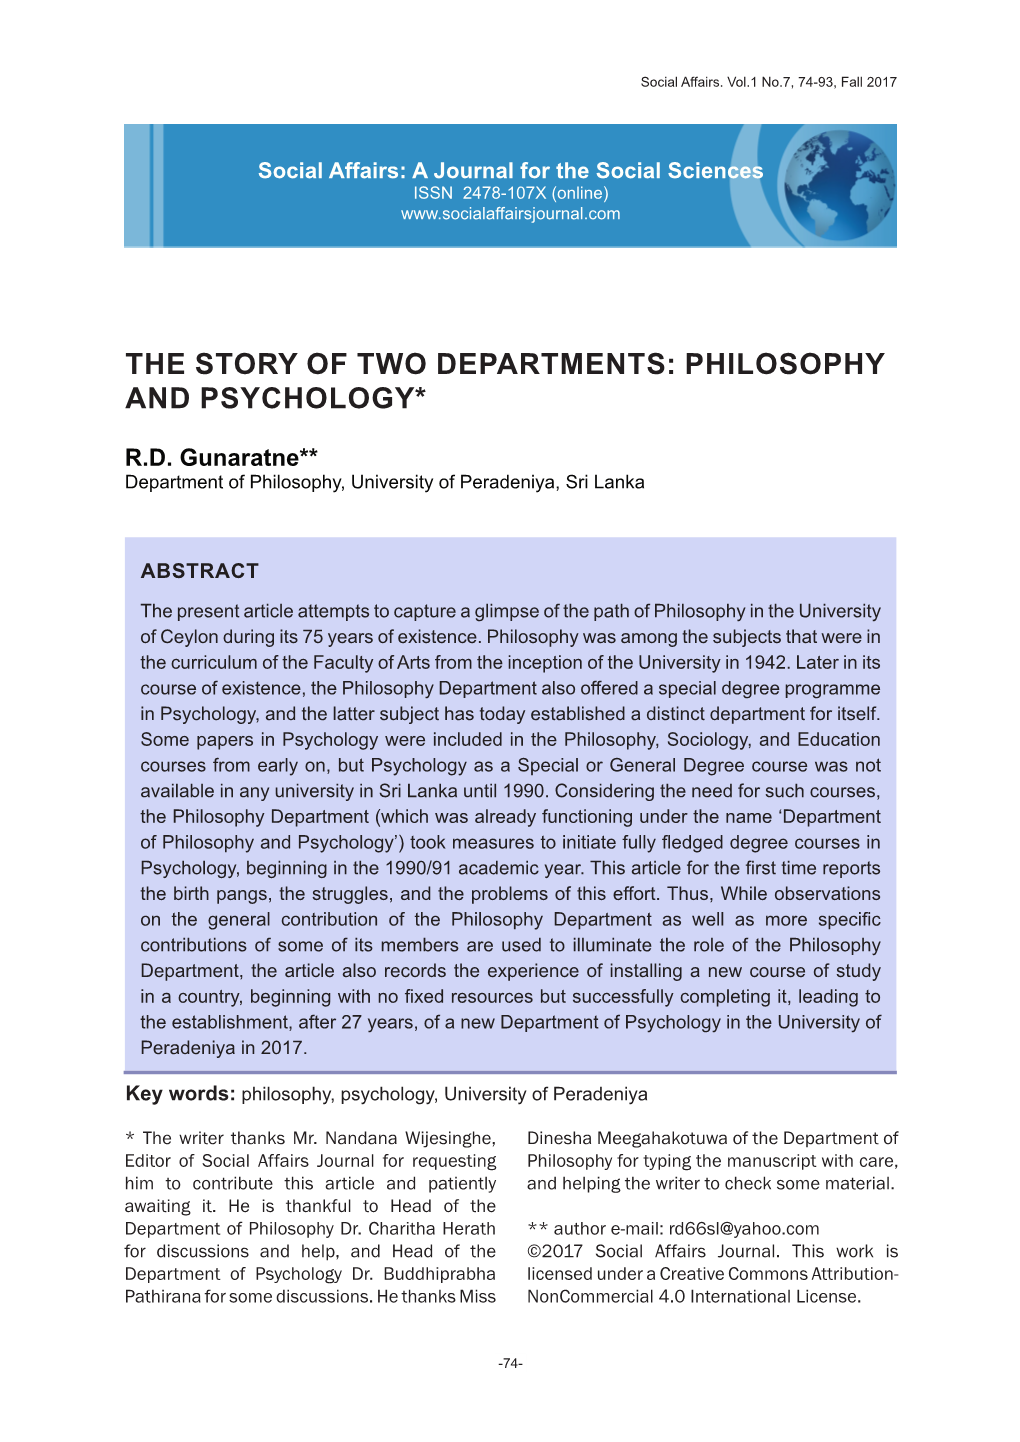 The Story of Two Departments: Philosophy and Psychology*